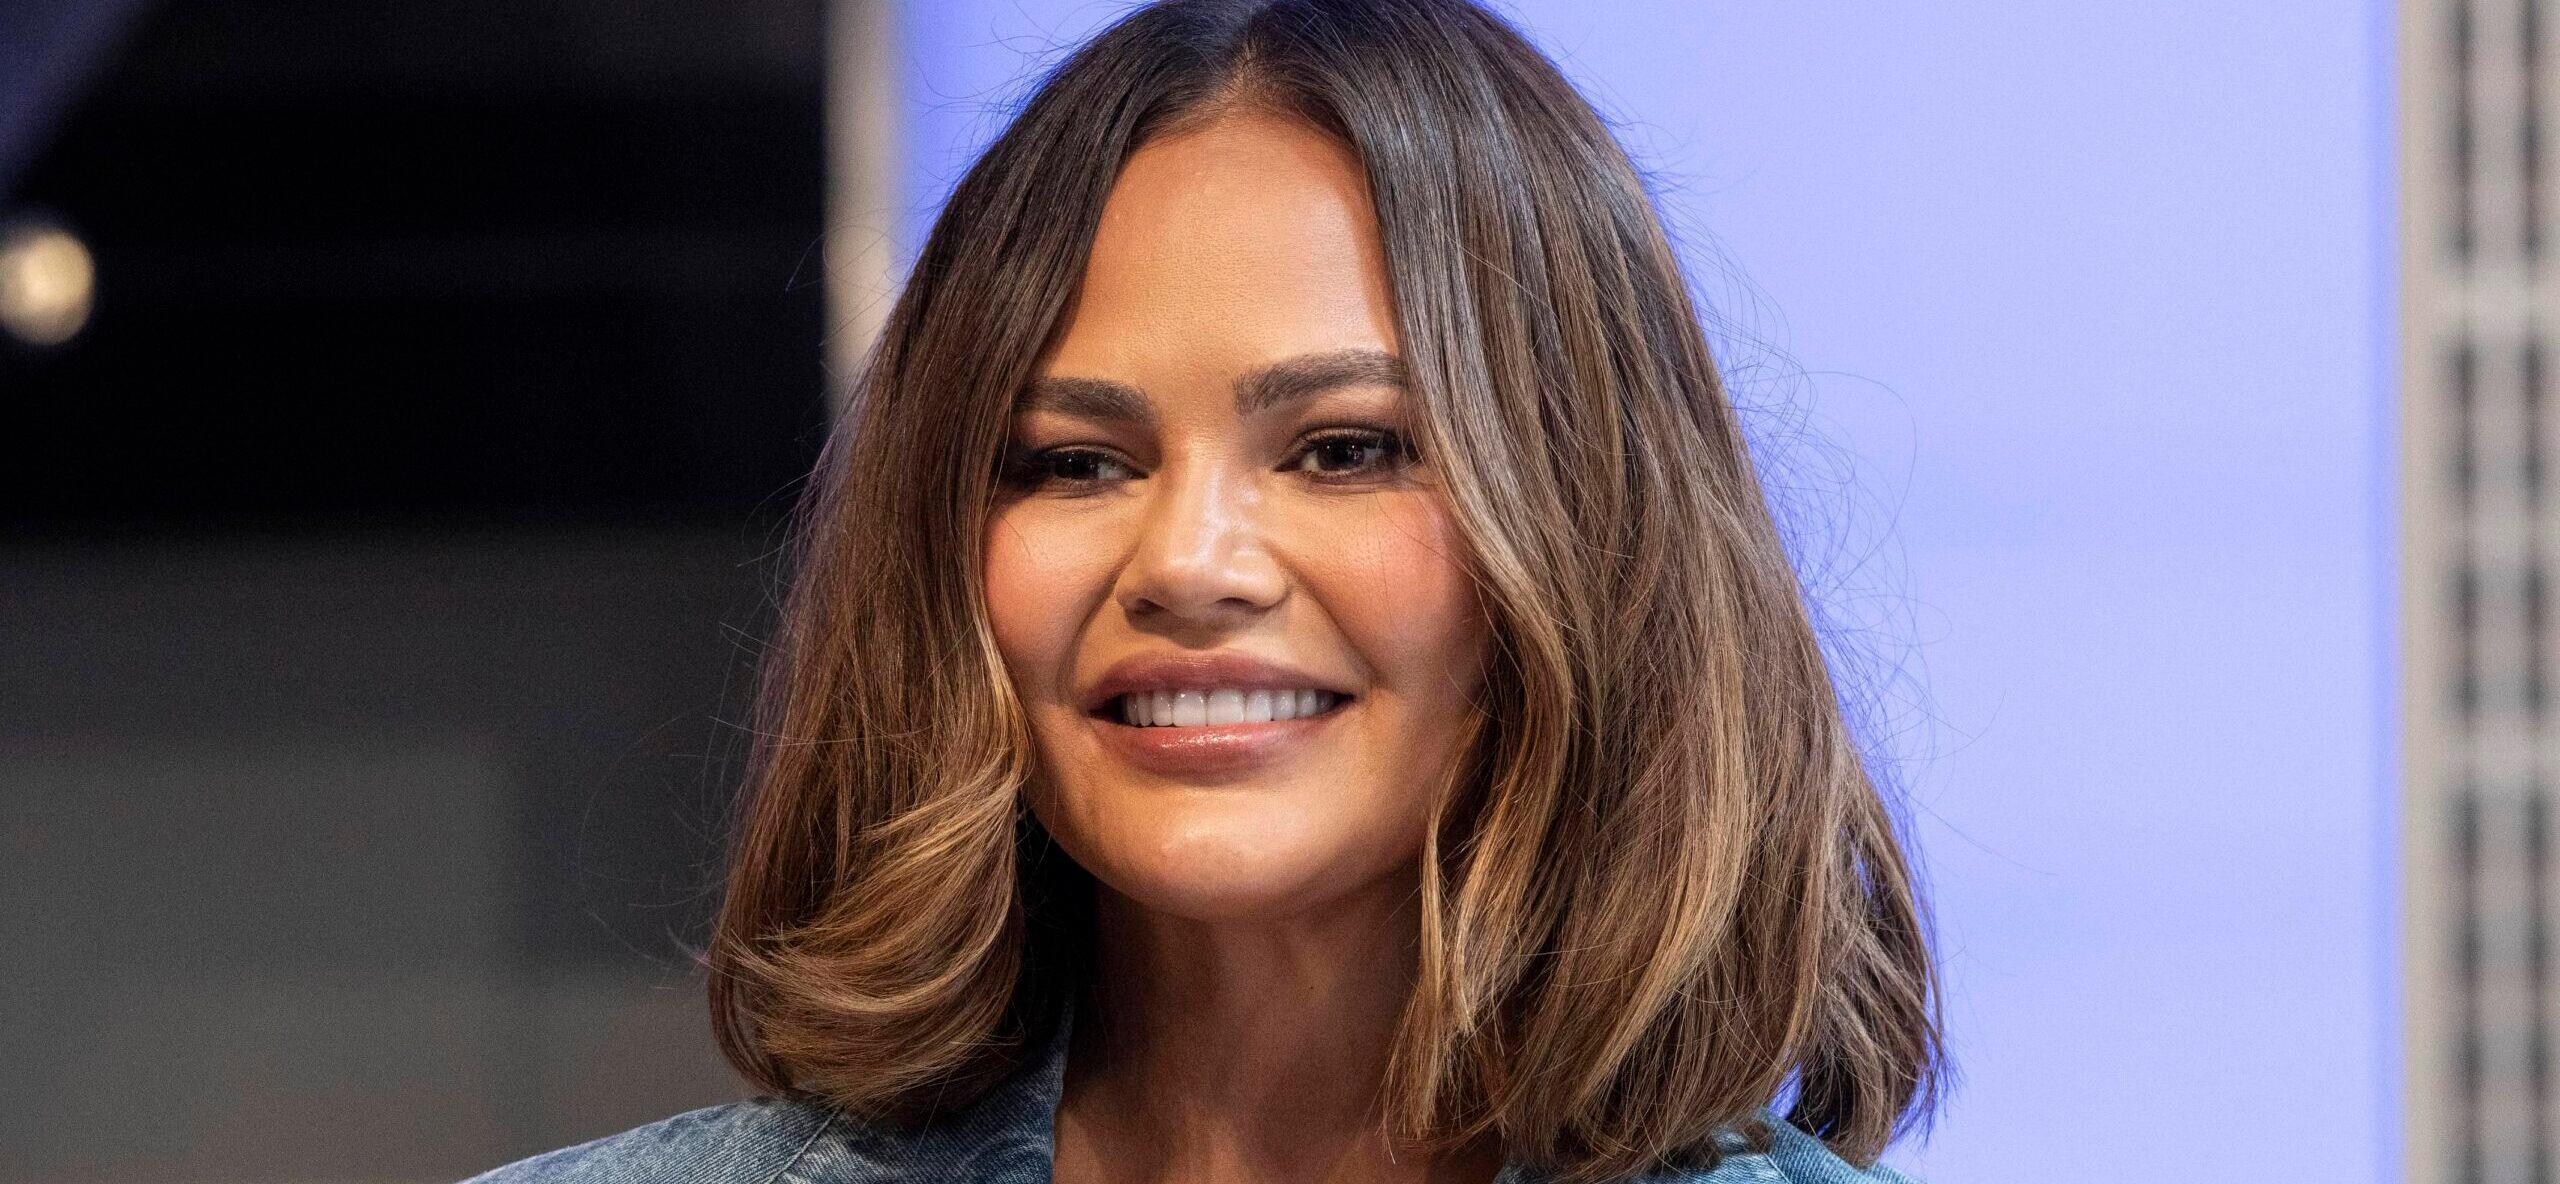 Chrissy Teigen and Two Friends to Light up the Empire State Building to Celebrate JBL Fest and Special Donation to the NAMM Foundation to Support Music Education